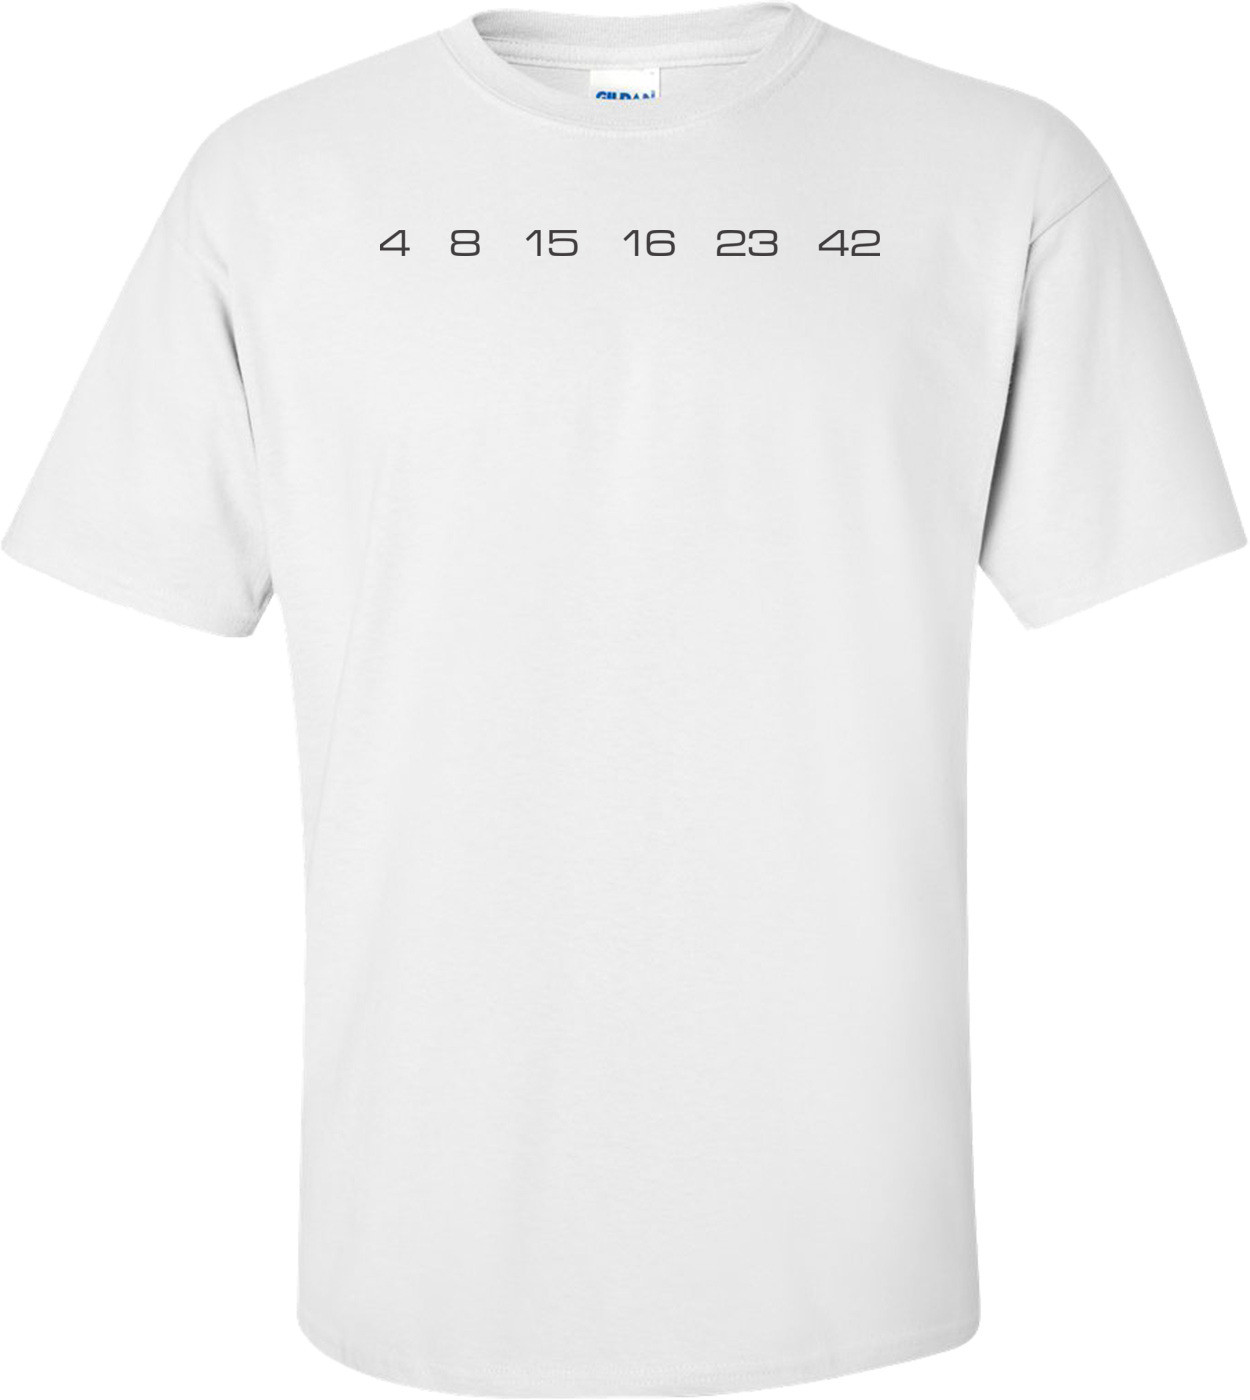 Lost - The Numbers T-shirt